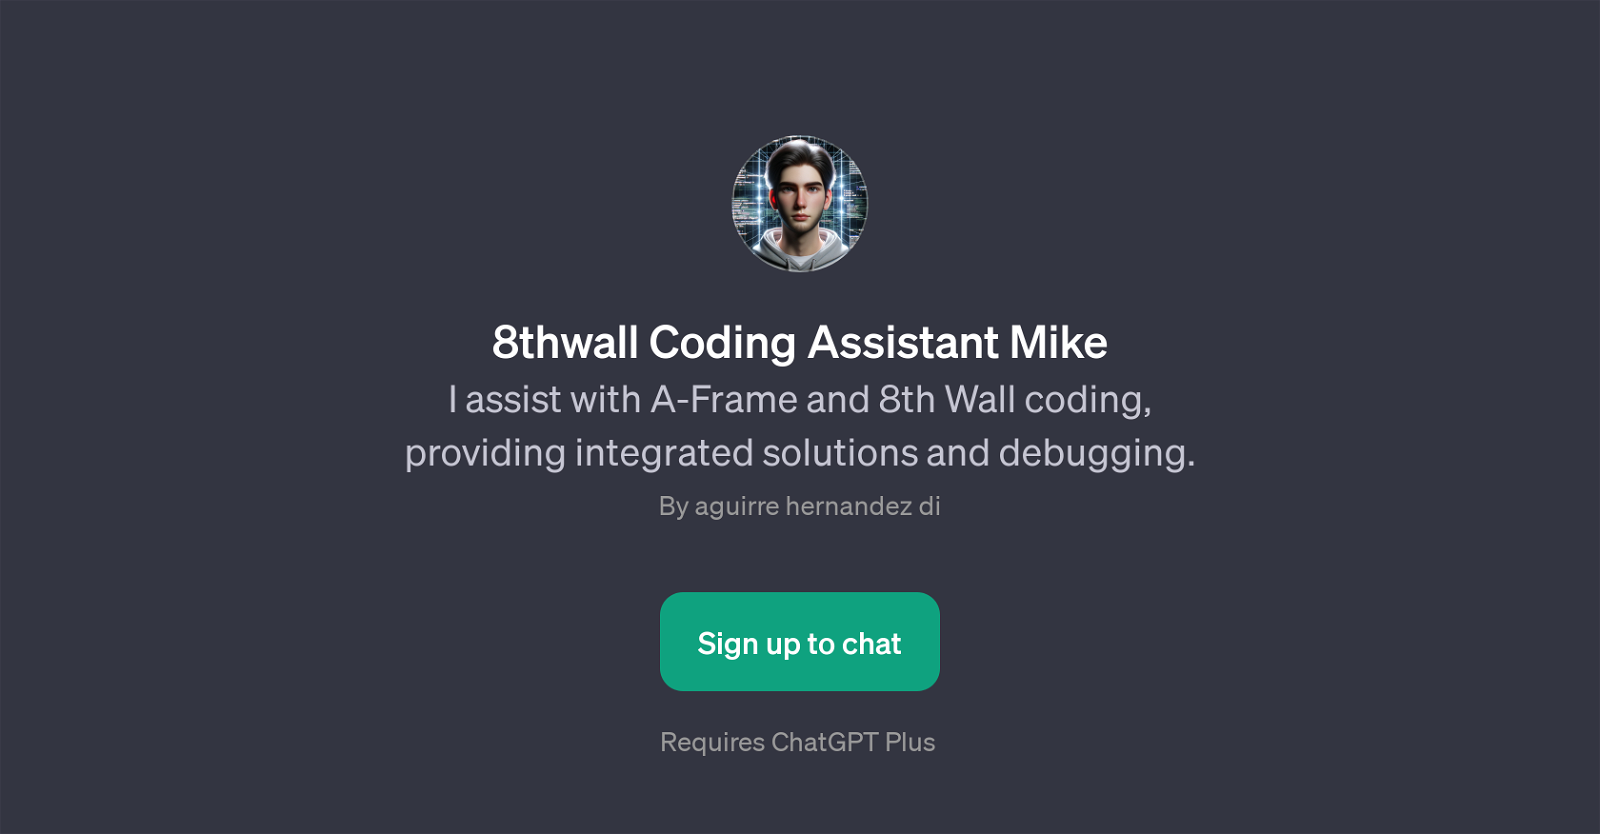 8thwall Coding Assistant Mike website